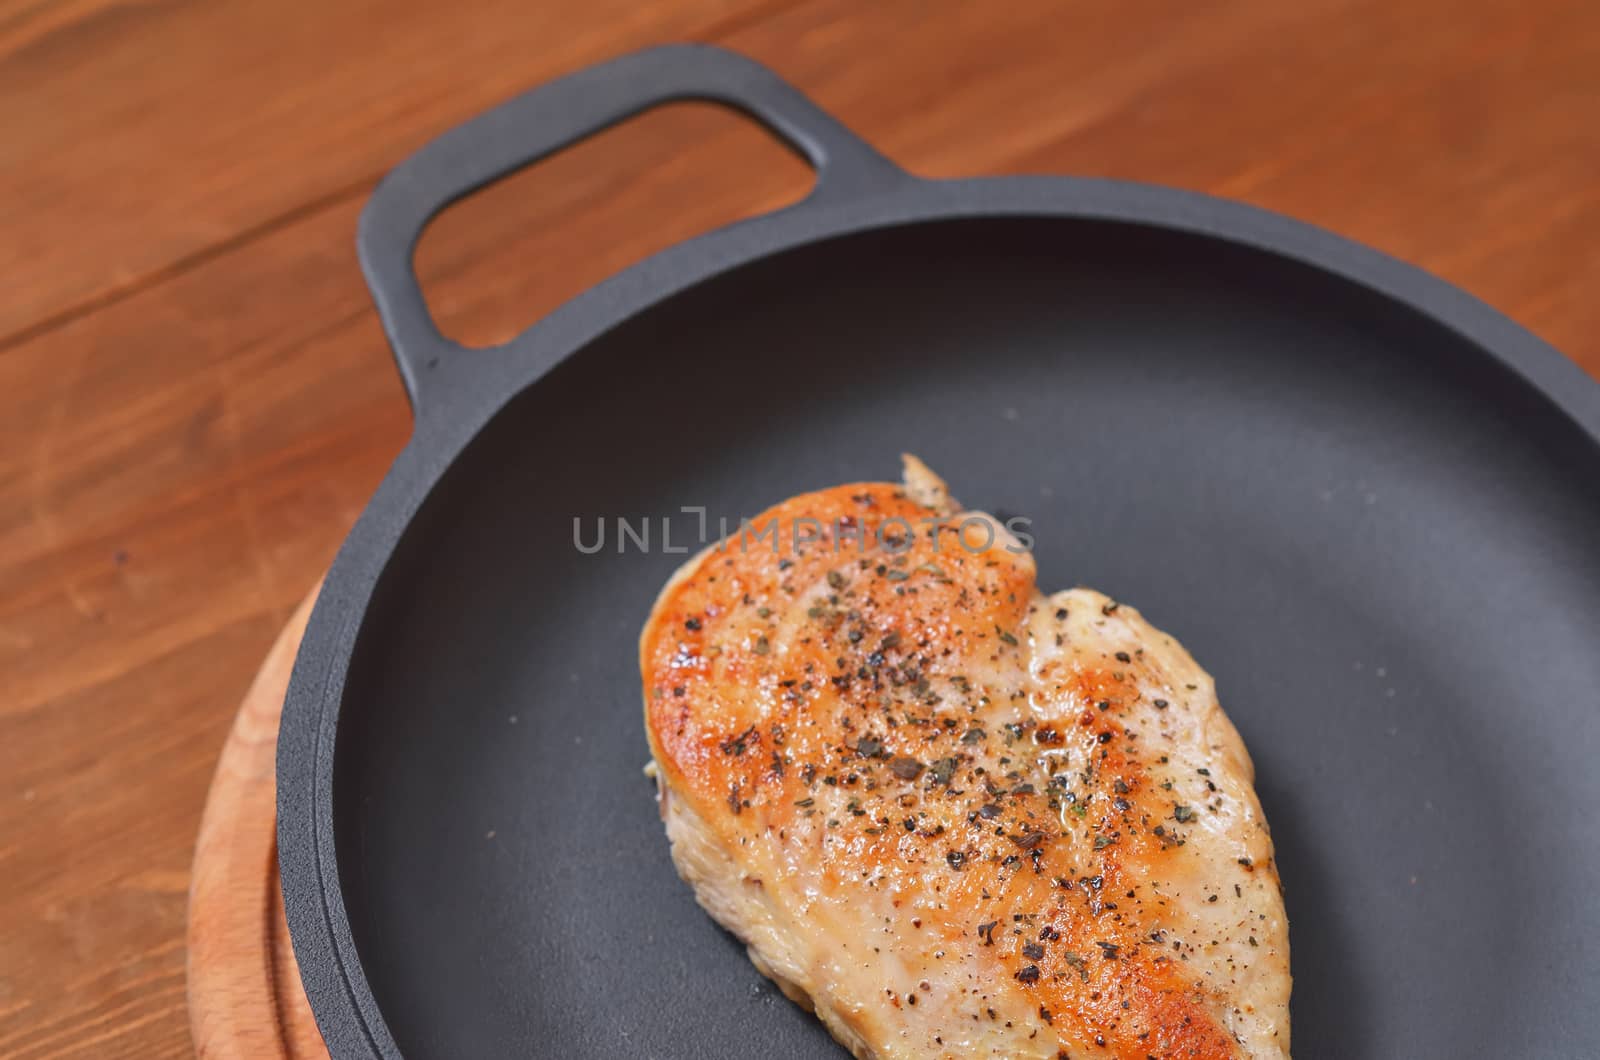 Fried chicken fillet is lying on a frying pan on a wooden table